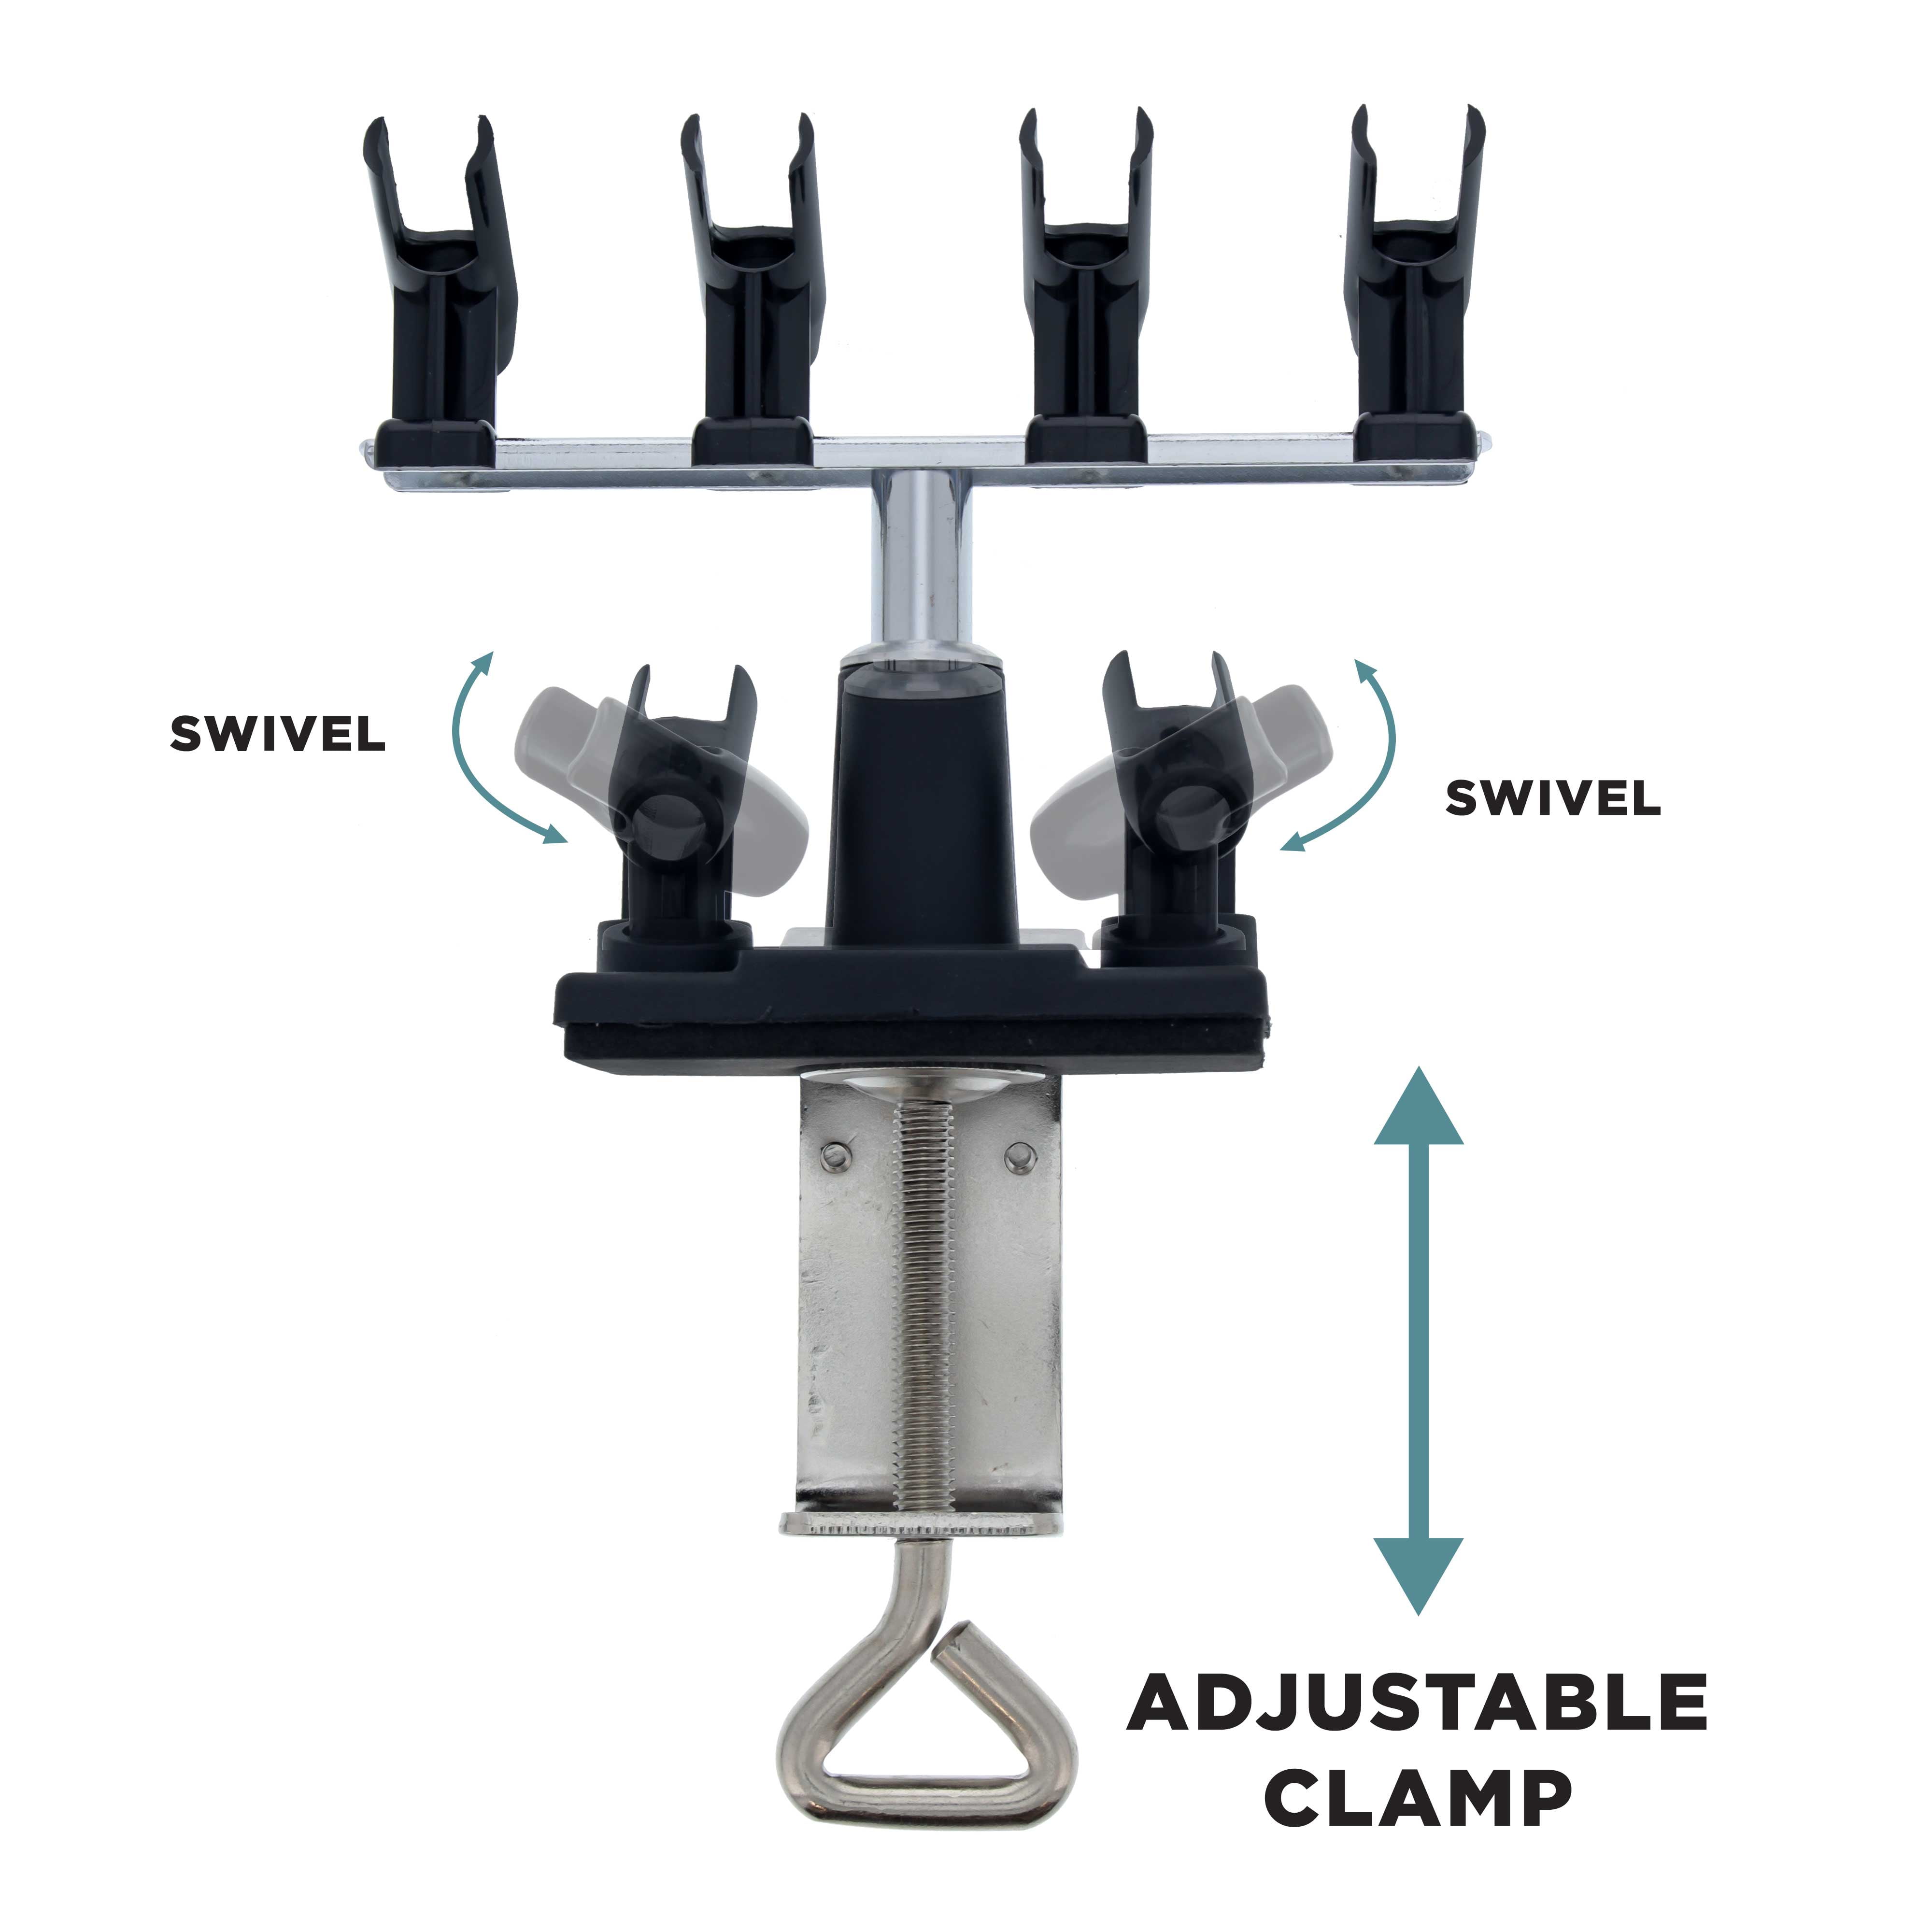 SAGUD Airbrush Holder Clamp-on Style Air Brush Station Stand Kit 360°  Rotate Holds Up to 6 Airbrush Guns